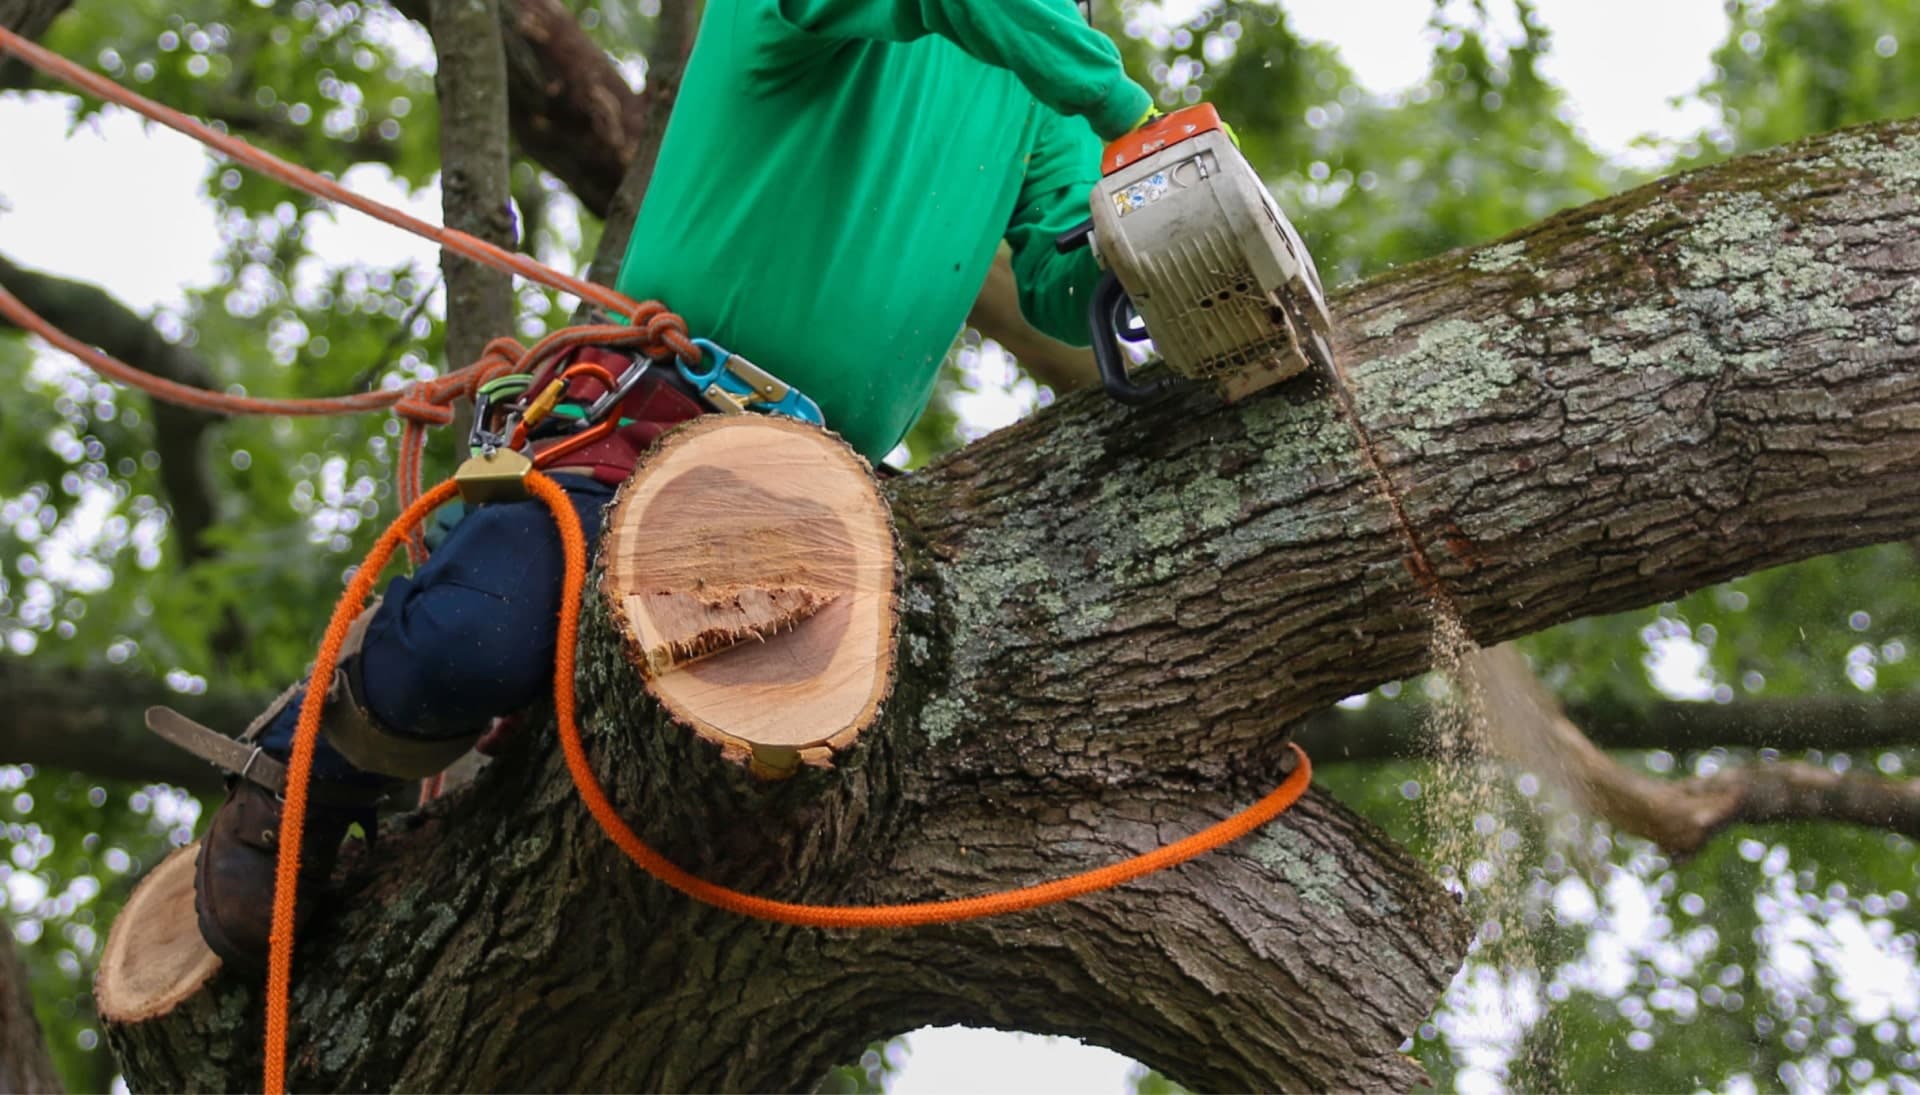 Shed your worries away with best tree removal in Gig Harbor